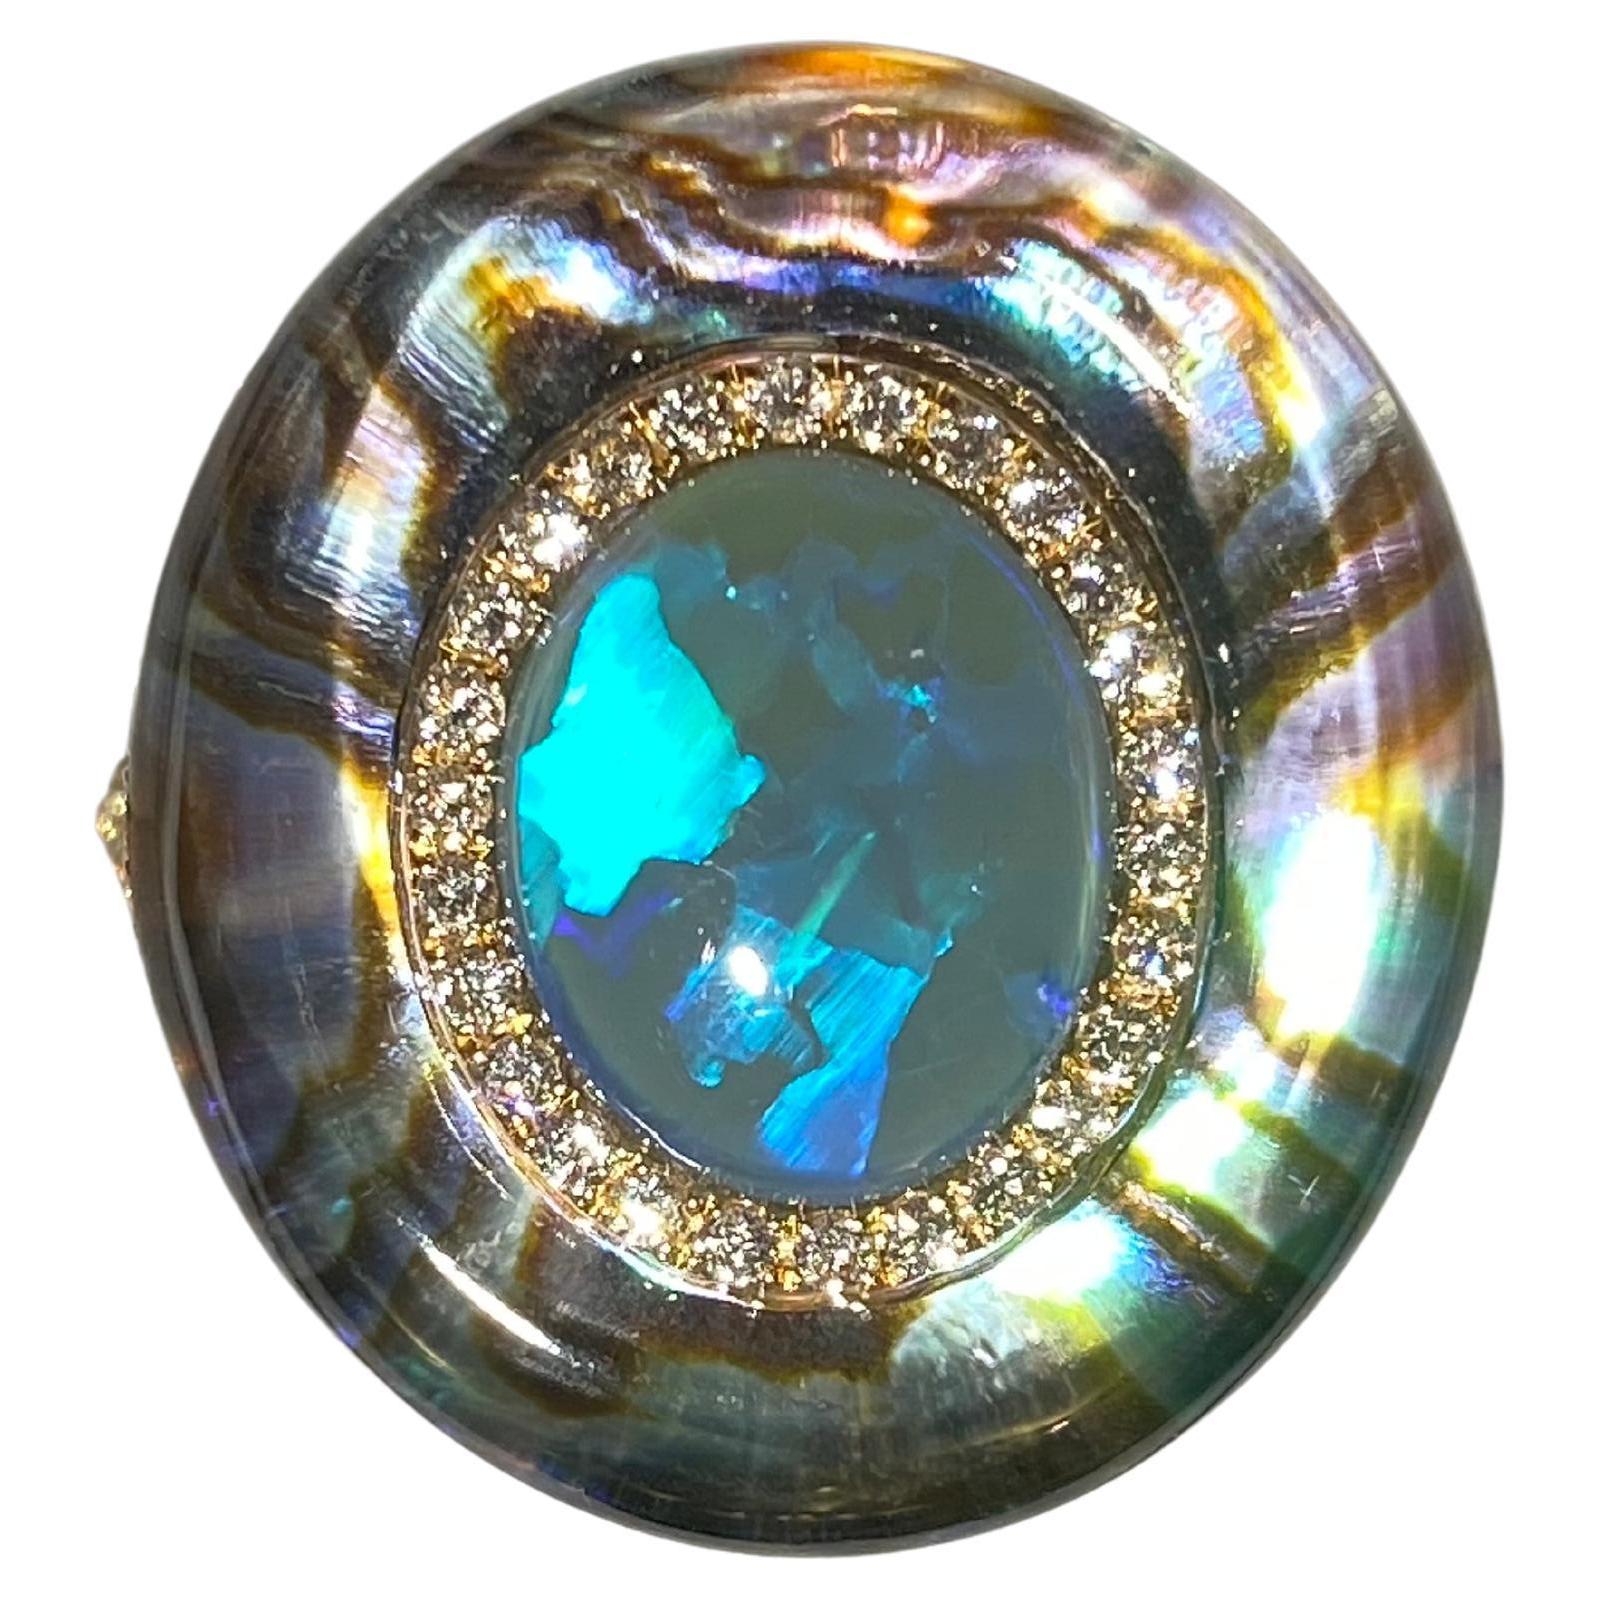 A 2.27 ct Solid Opal, Abalone Shell, Crystal and Diamond in 18k Yellow Gold. The solid opal is surrounded by a circle of diamond pave, on the outer circle is where the abalone shell is. The abalone shell is cover by thick crystal  giving the ring a